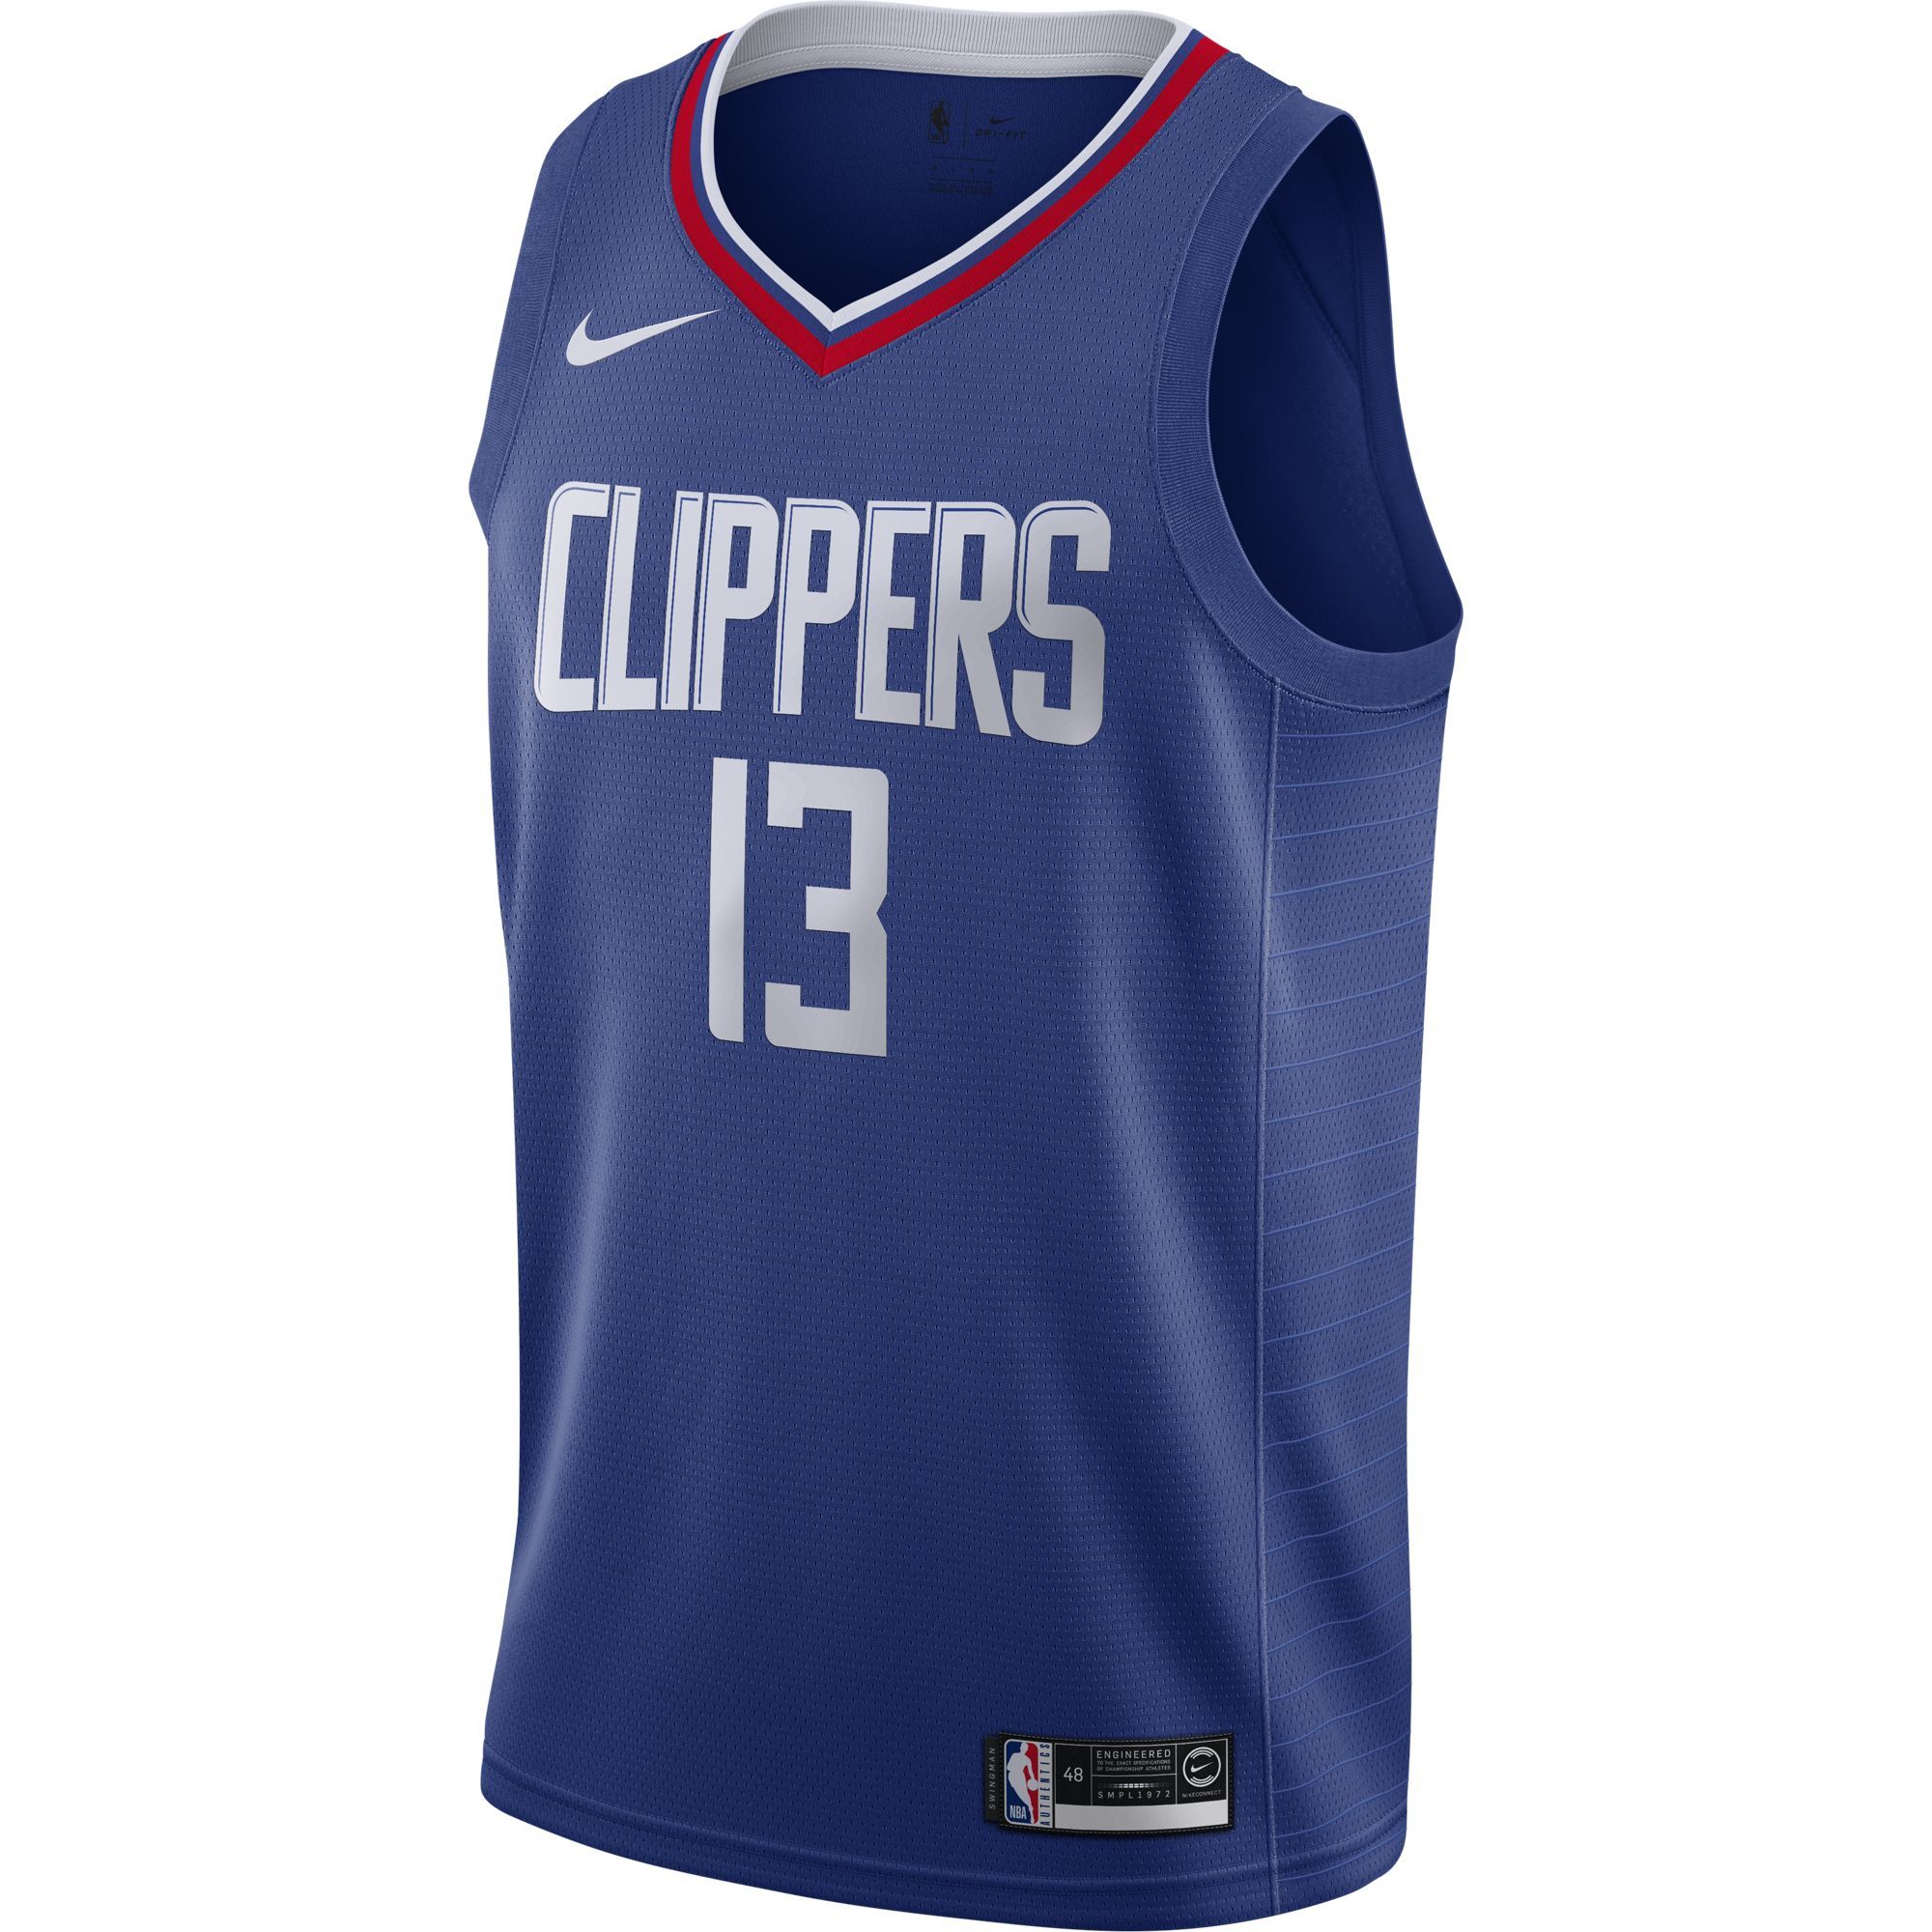 clippers jersey dress